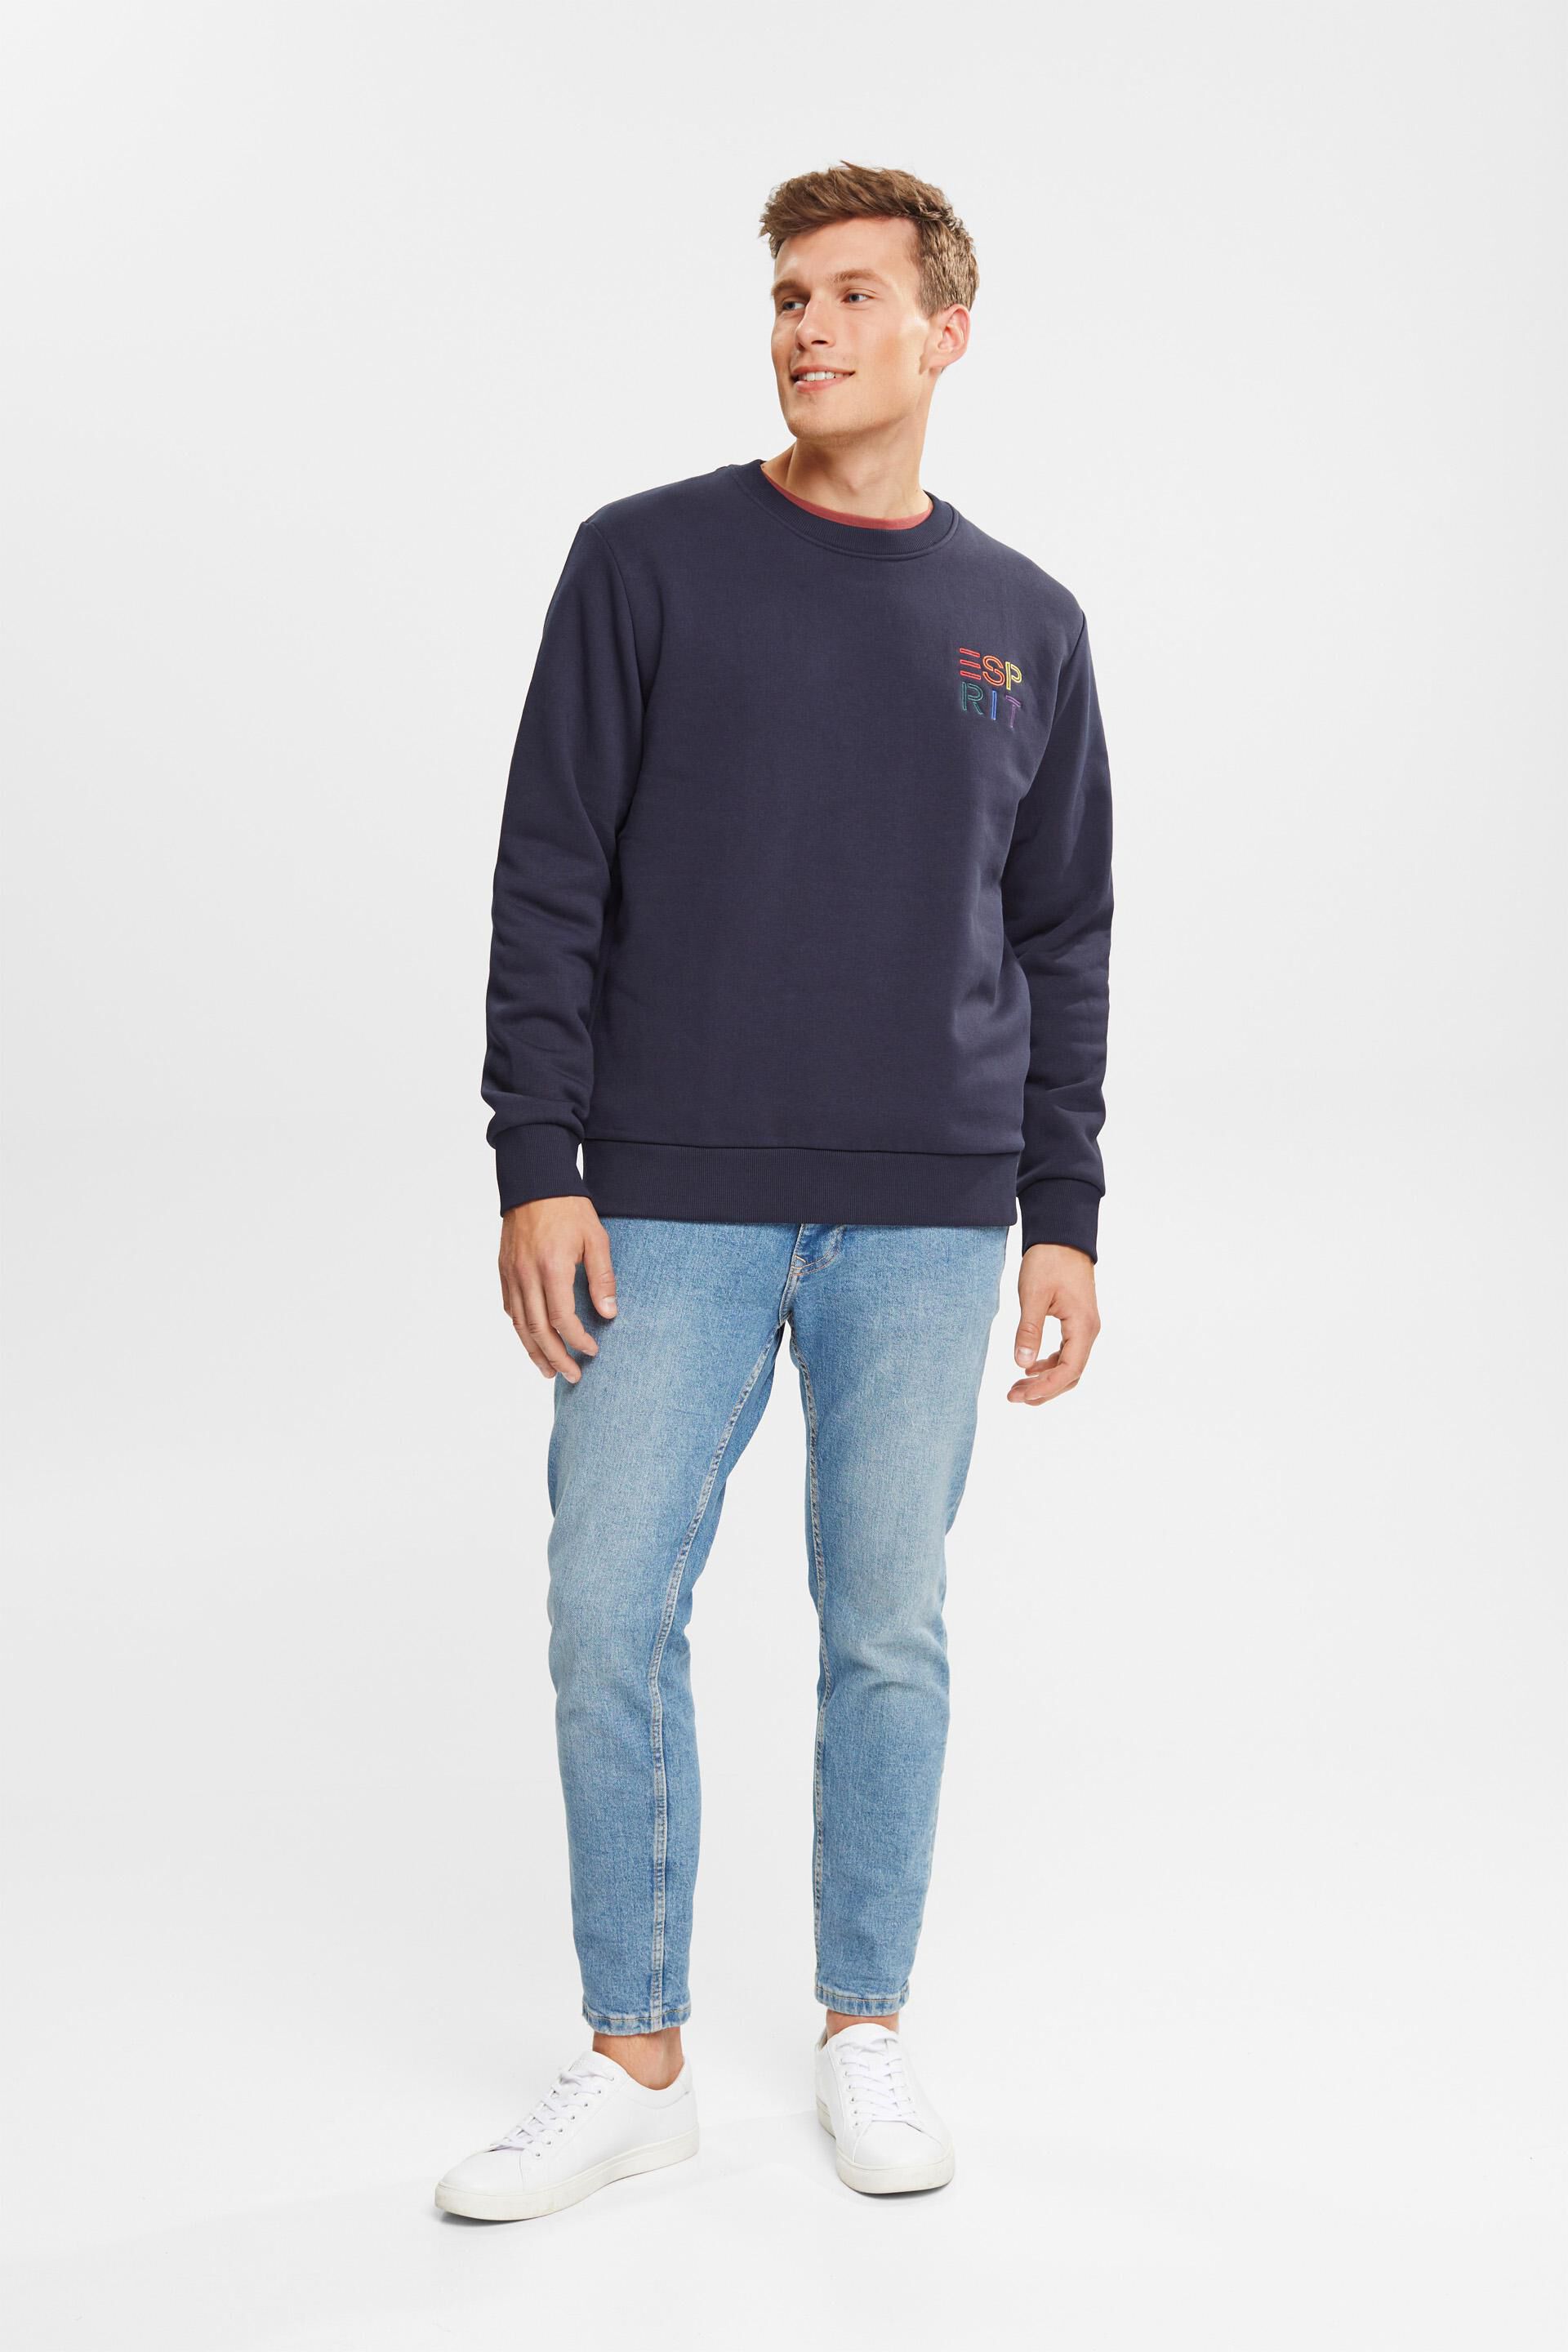 Esprit a Sweatshirt logo colourful with embroidered